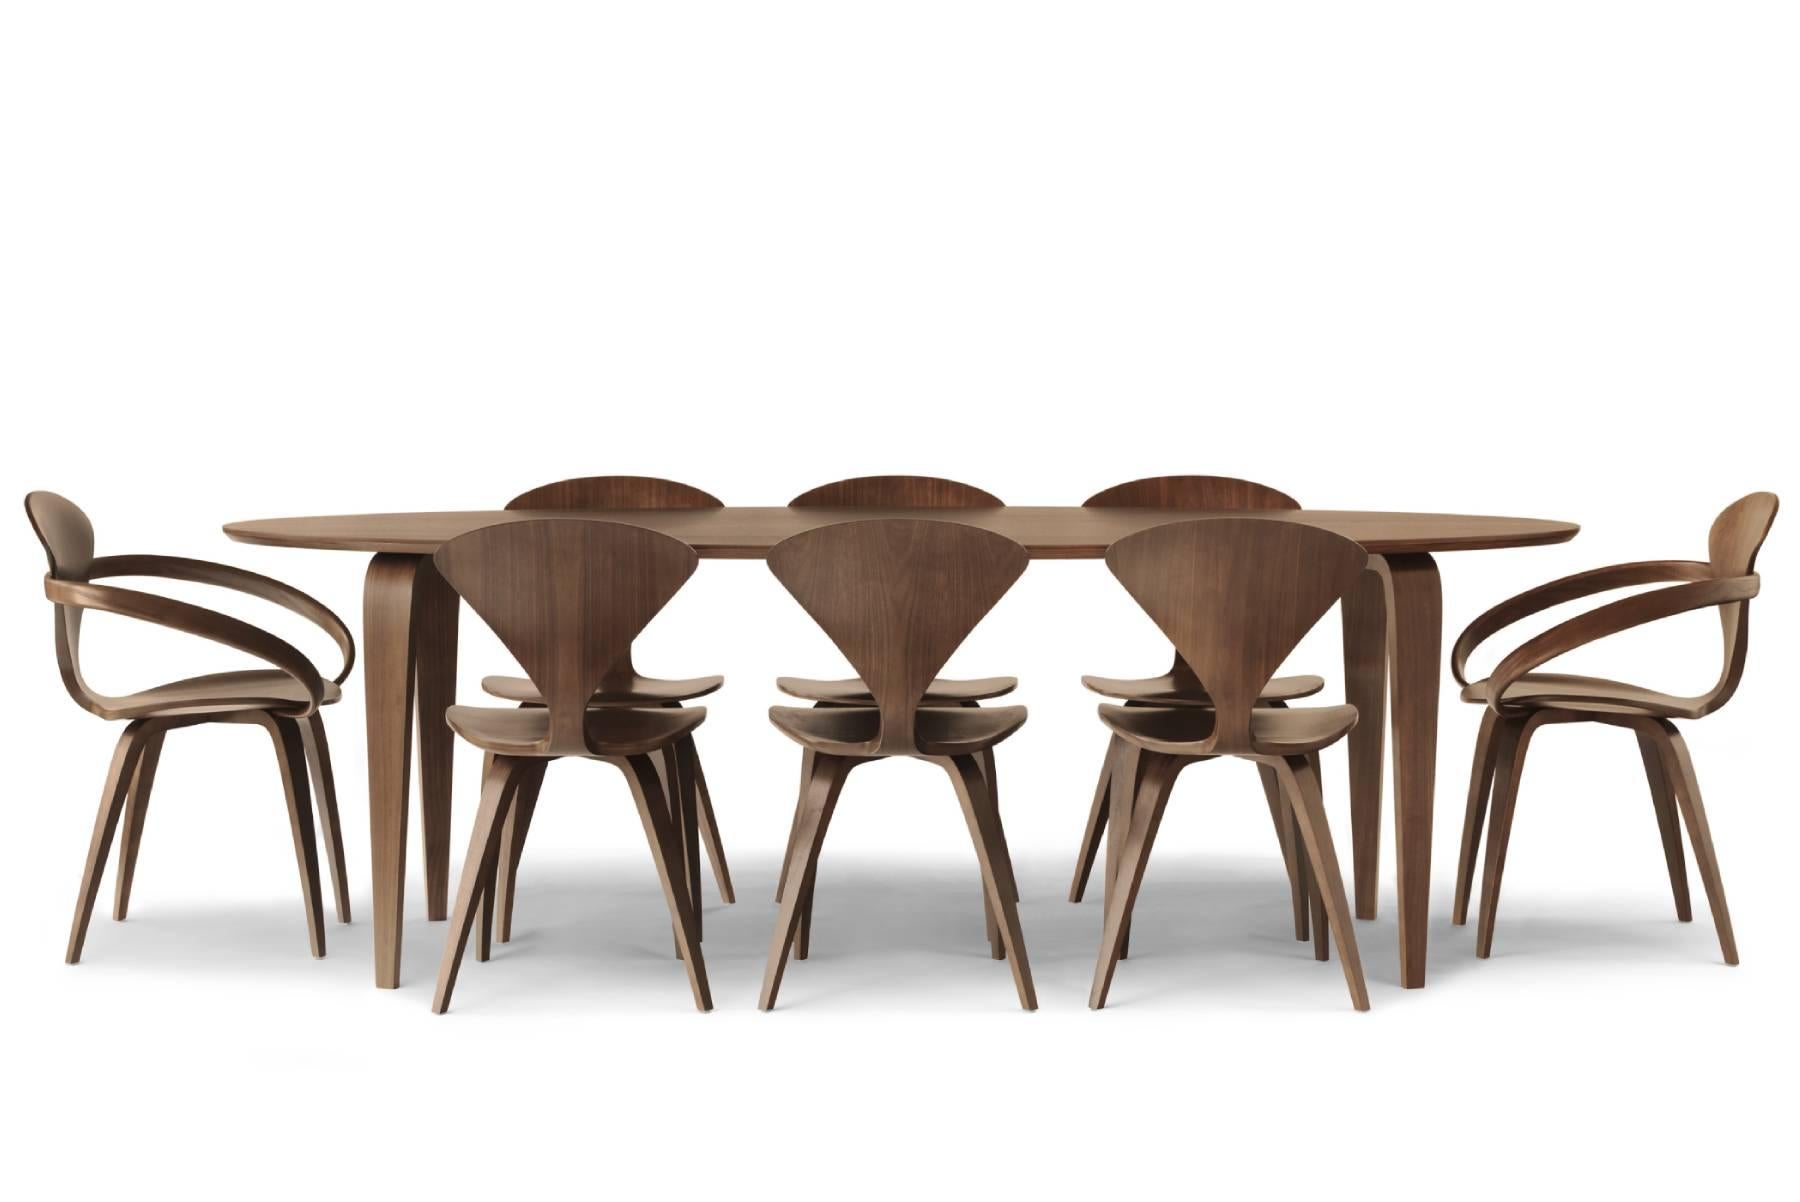 Introduced in 2003, Cherner tables are designed by Benjamin Cherner to compliment Cherner seating. Perfect in a formal or informal setting, the tables are strong and lightweight. Cherner tables are available in oval, round and rectangular shapes